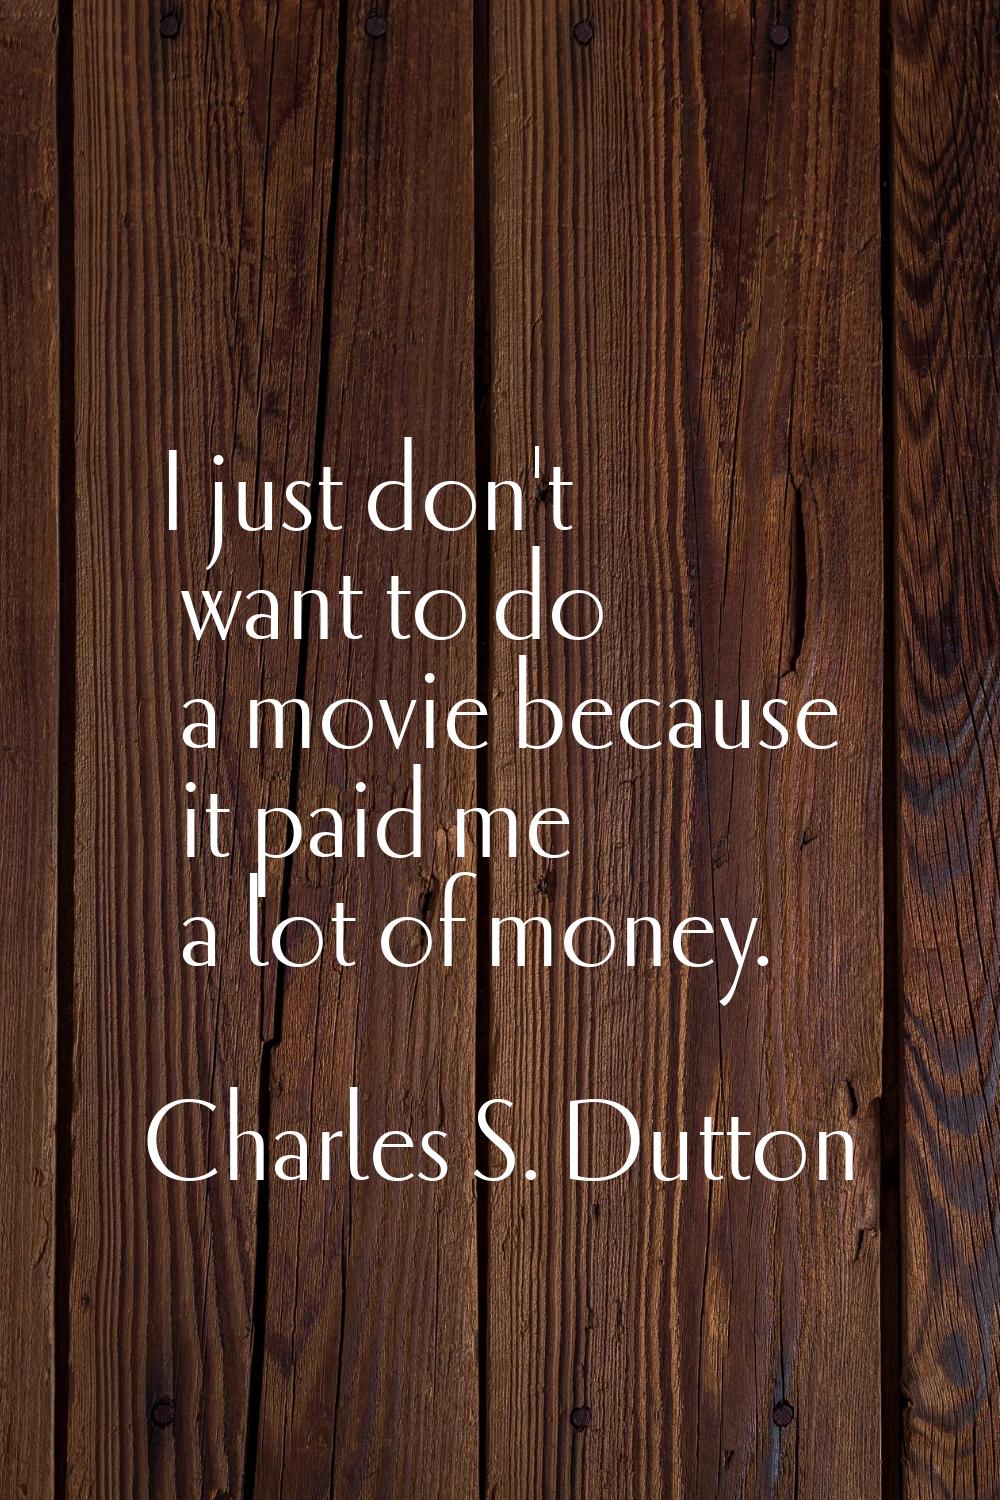 I just don't want to do a movie because it paid me a lot of money.